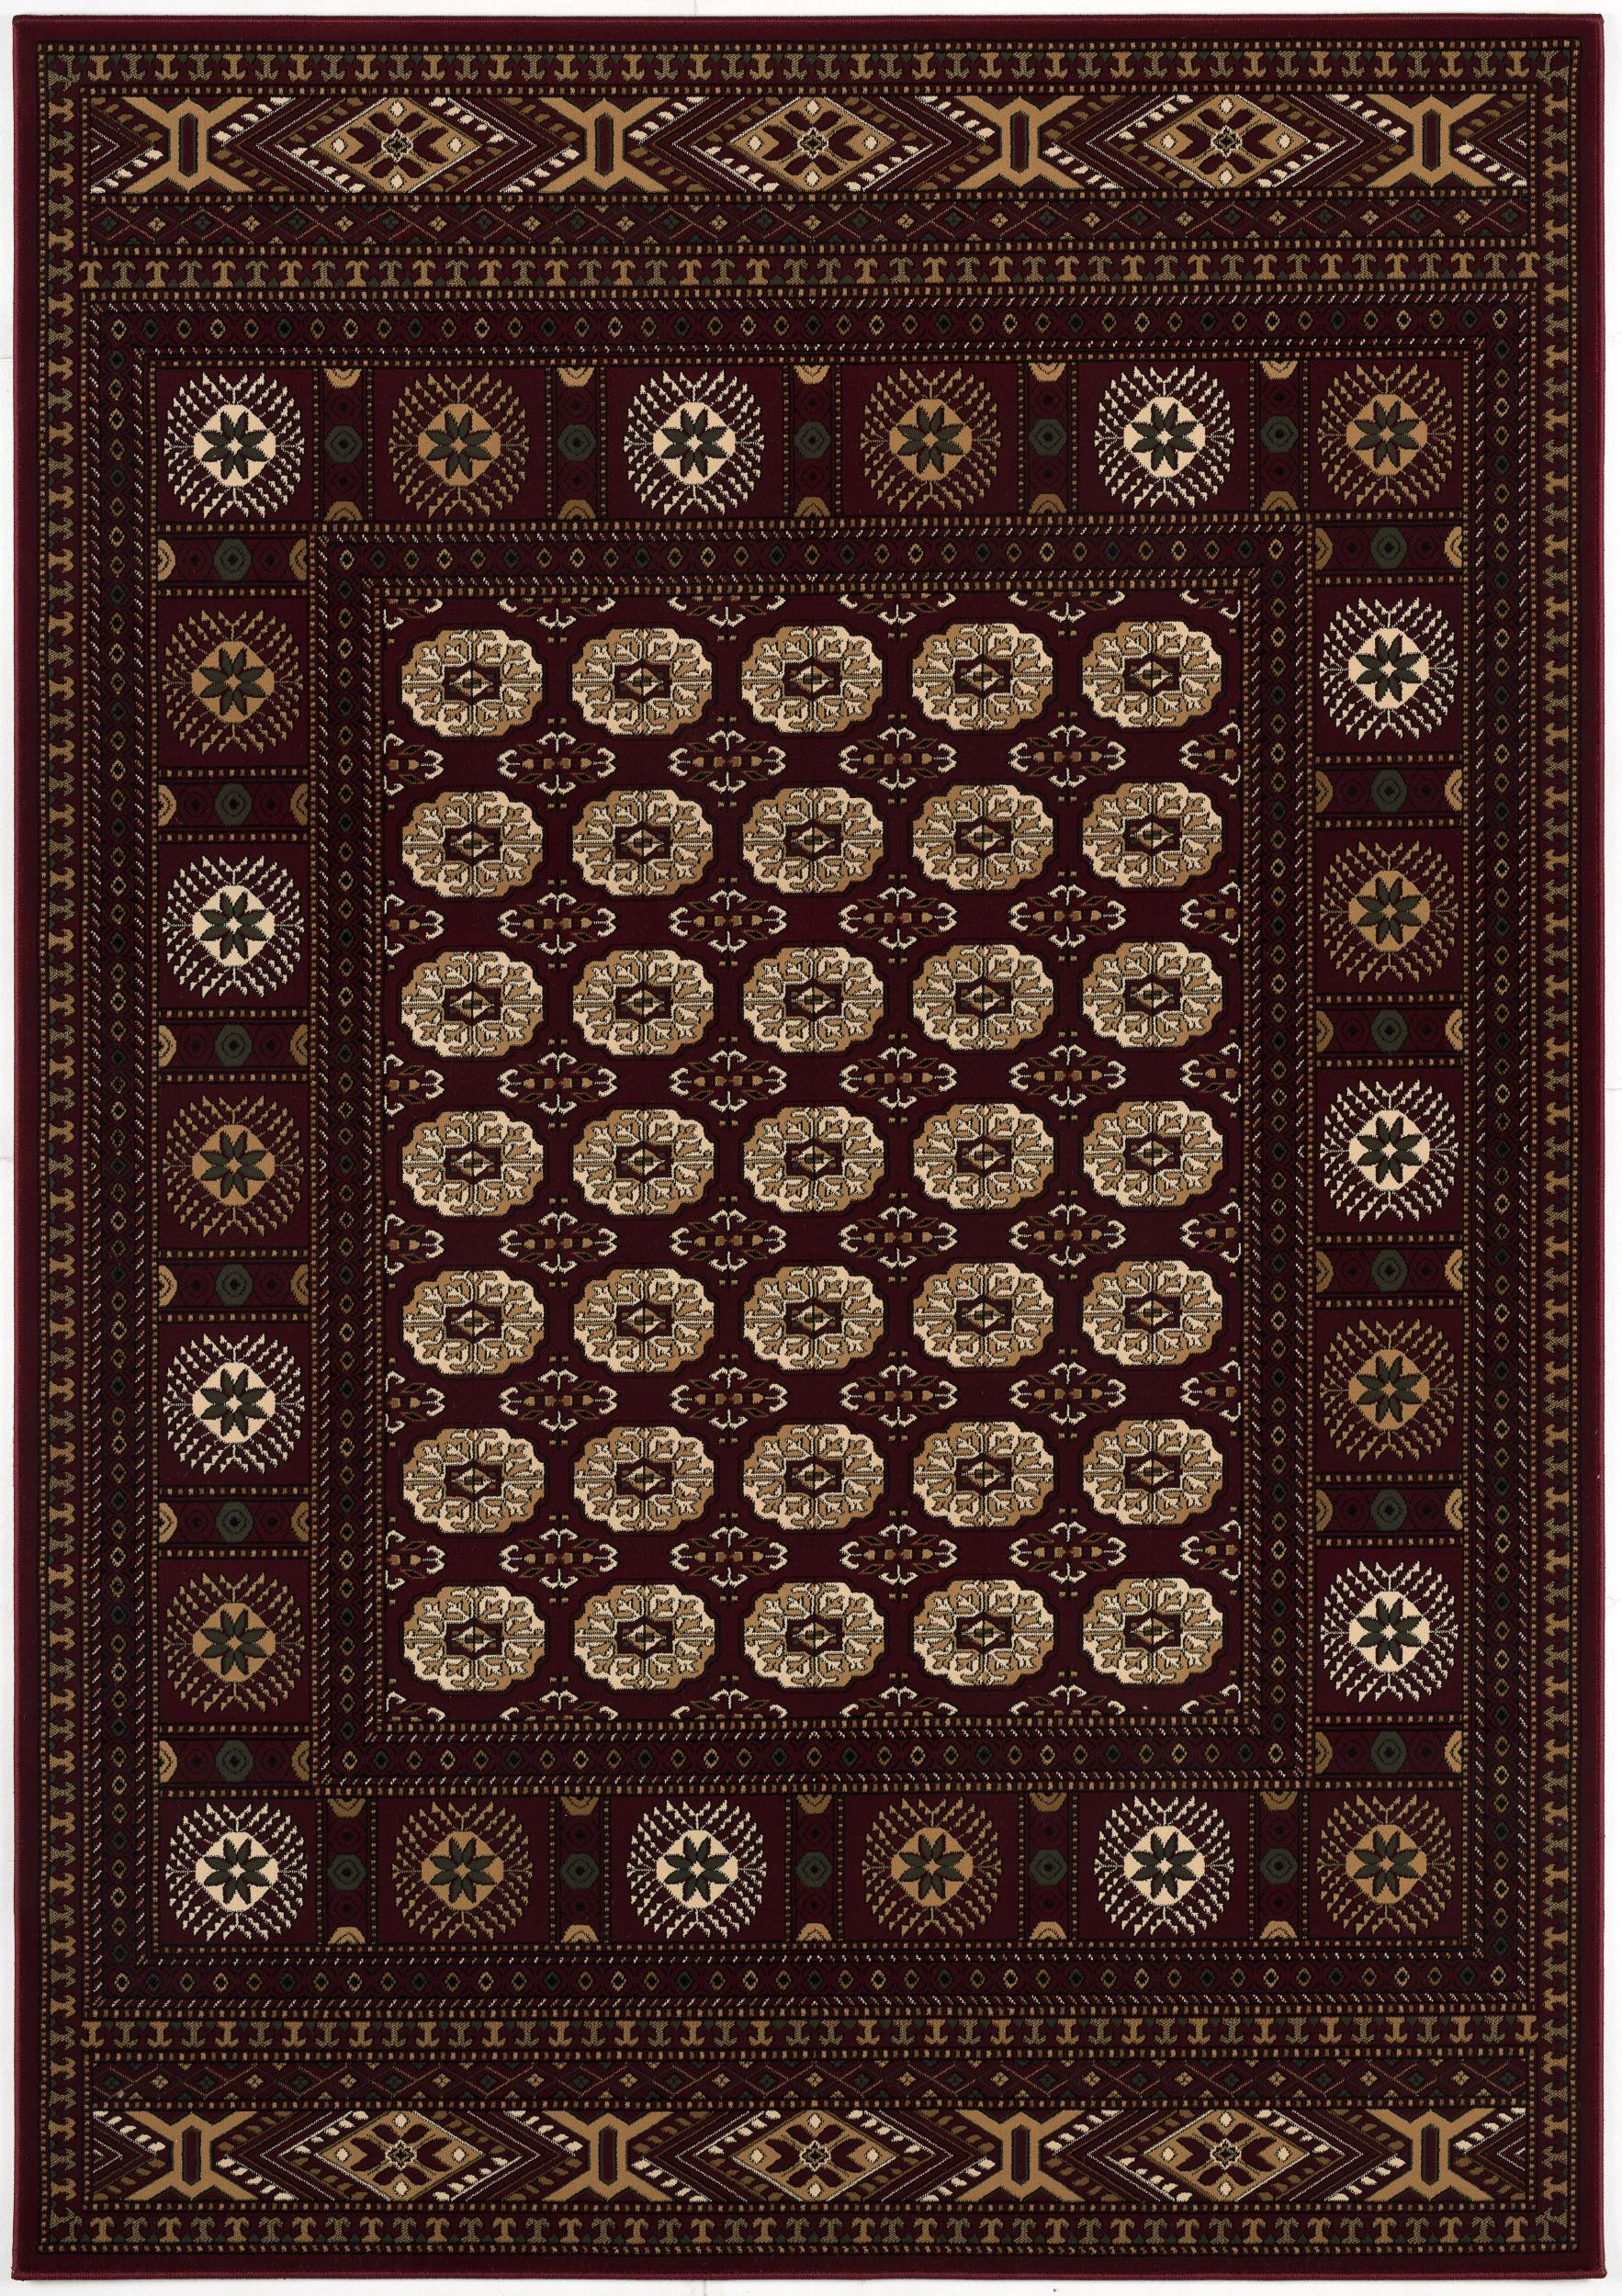 2’ x 15’ Red Eclectic Geometric Pattern Runner Rug-395454-1